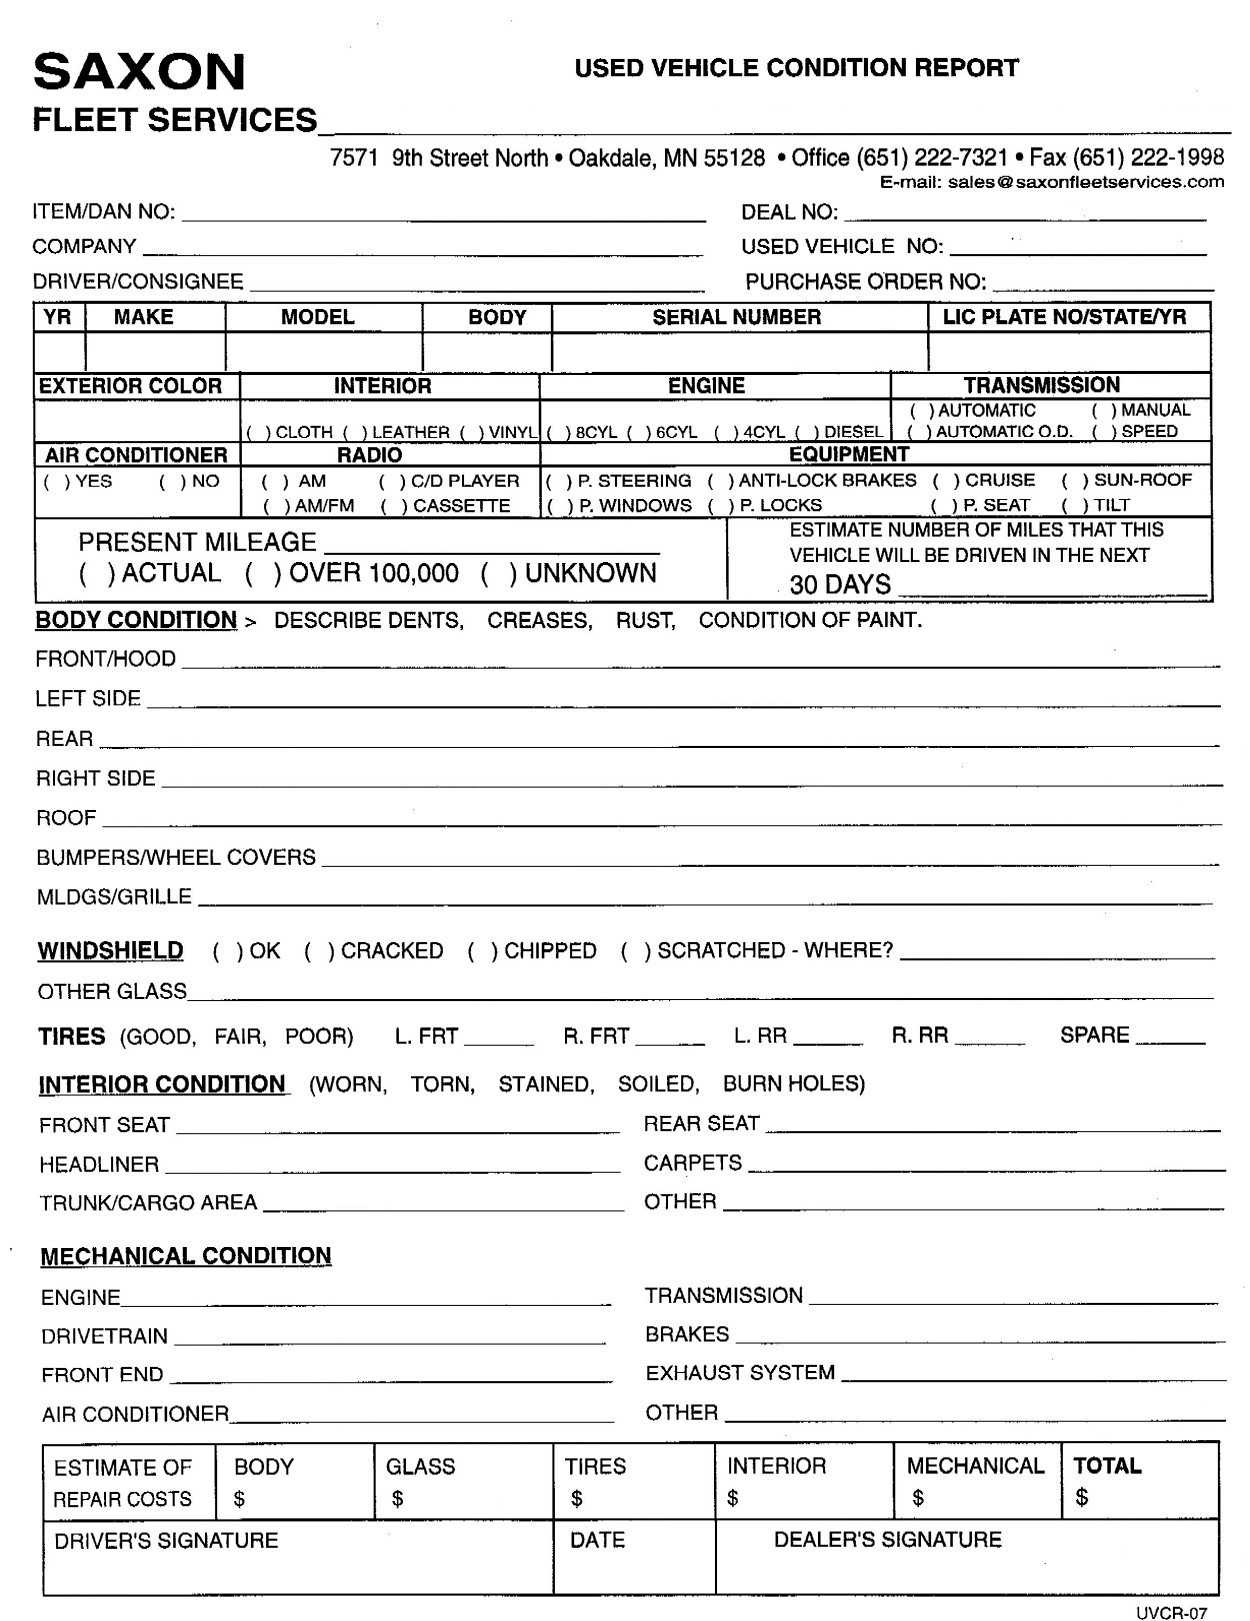 18 Images Of Truck Condition Report Template | Masorler With Truck Condition Report Template